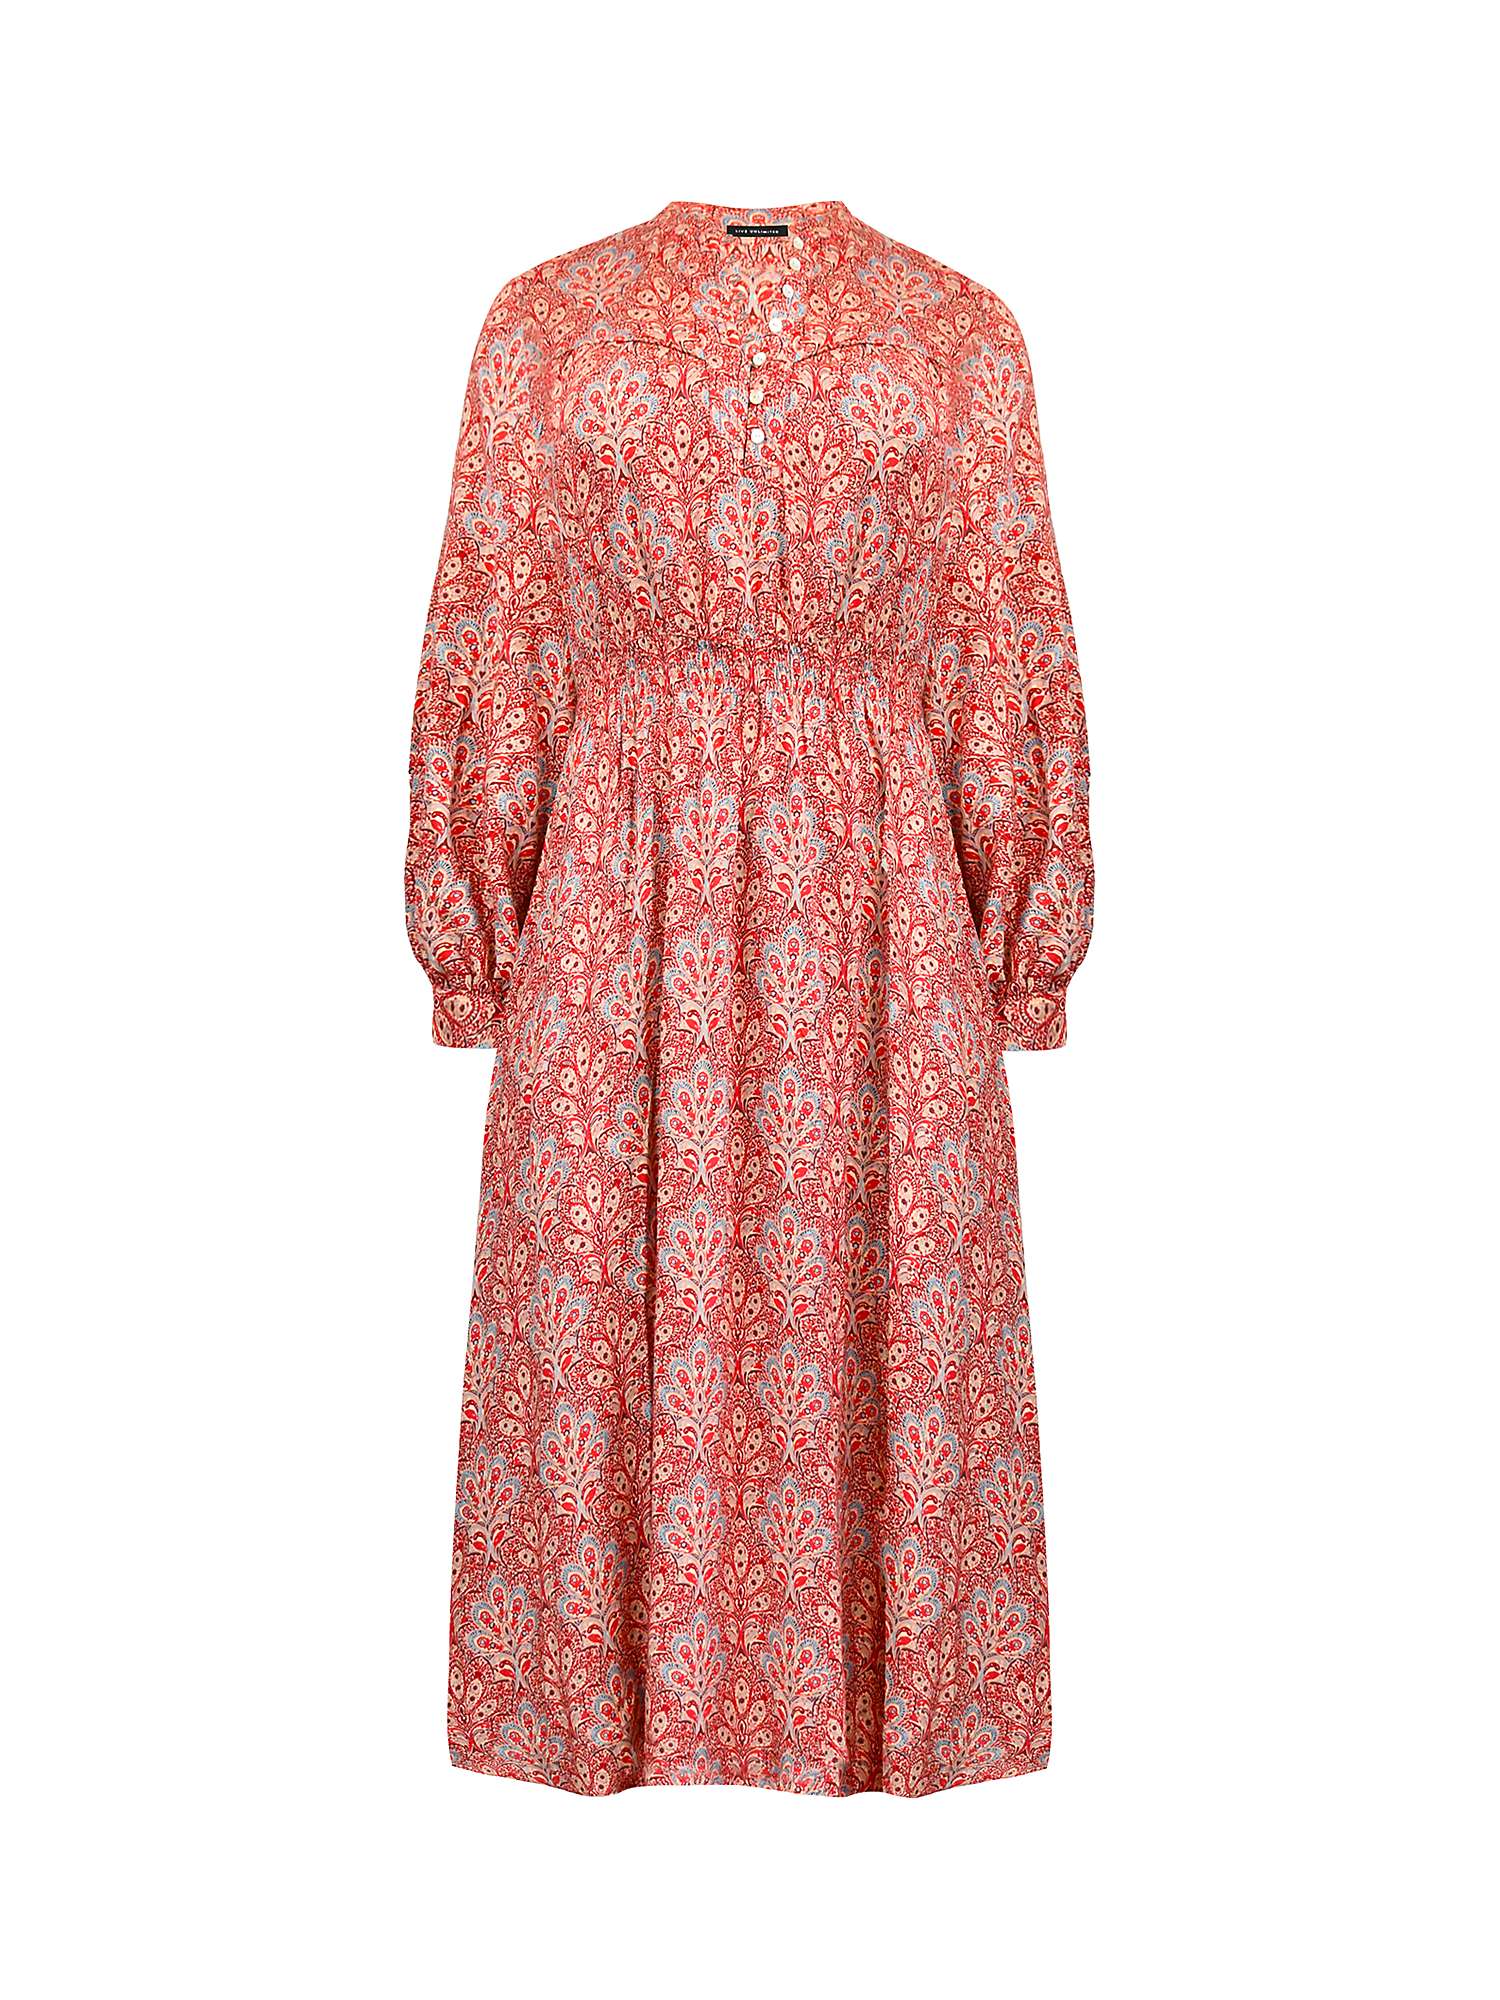 Buy Live Unlimited Curve Paisley Print Shirred Waist Midaxi Dress, Red/Multi Online at johnlewis.com